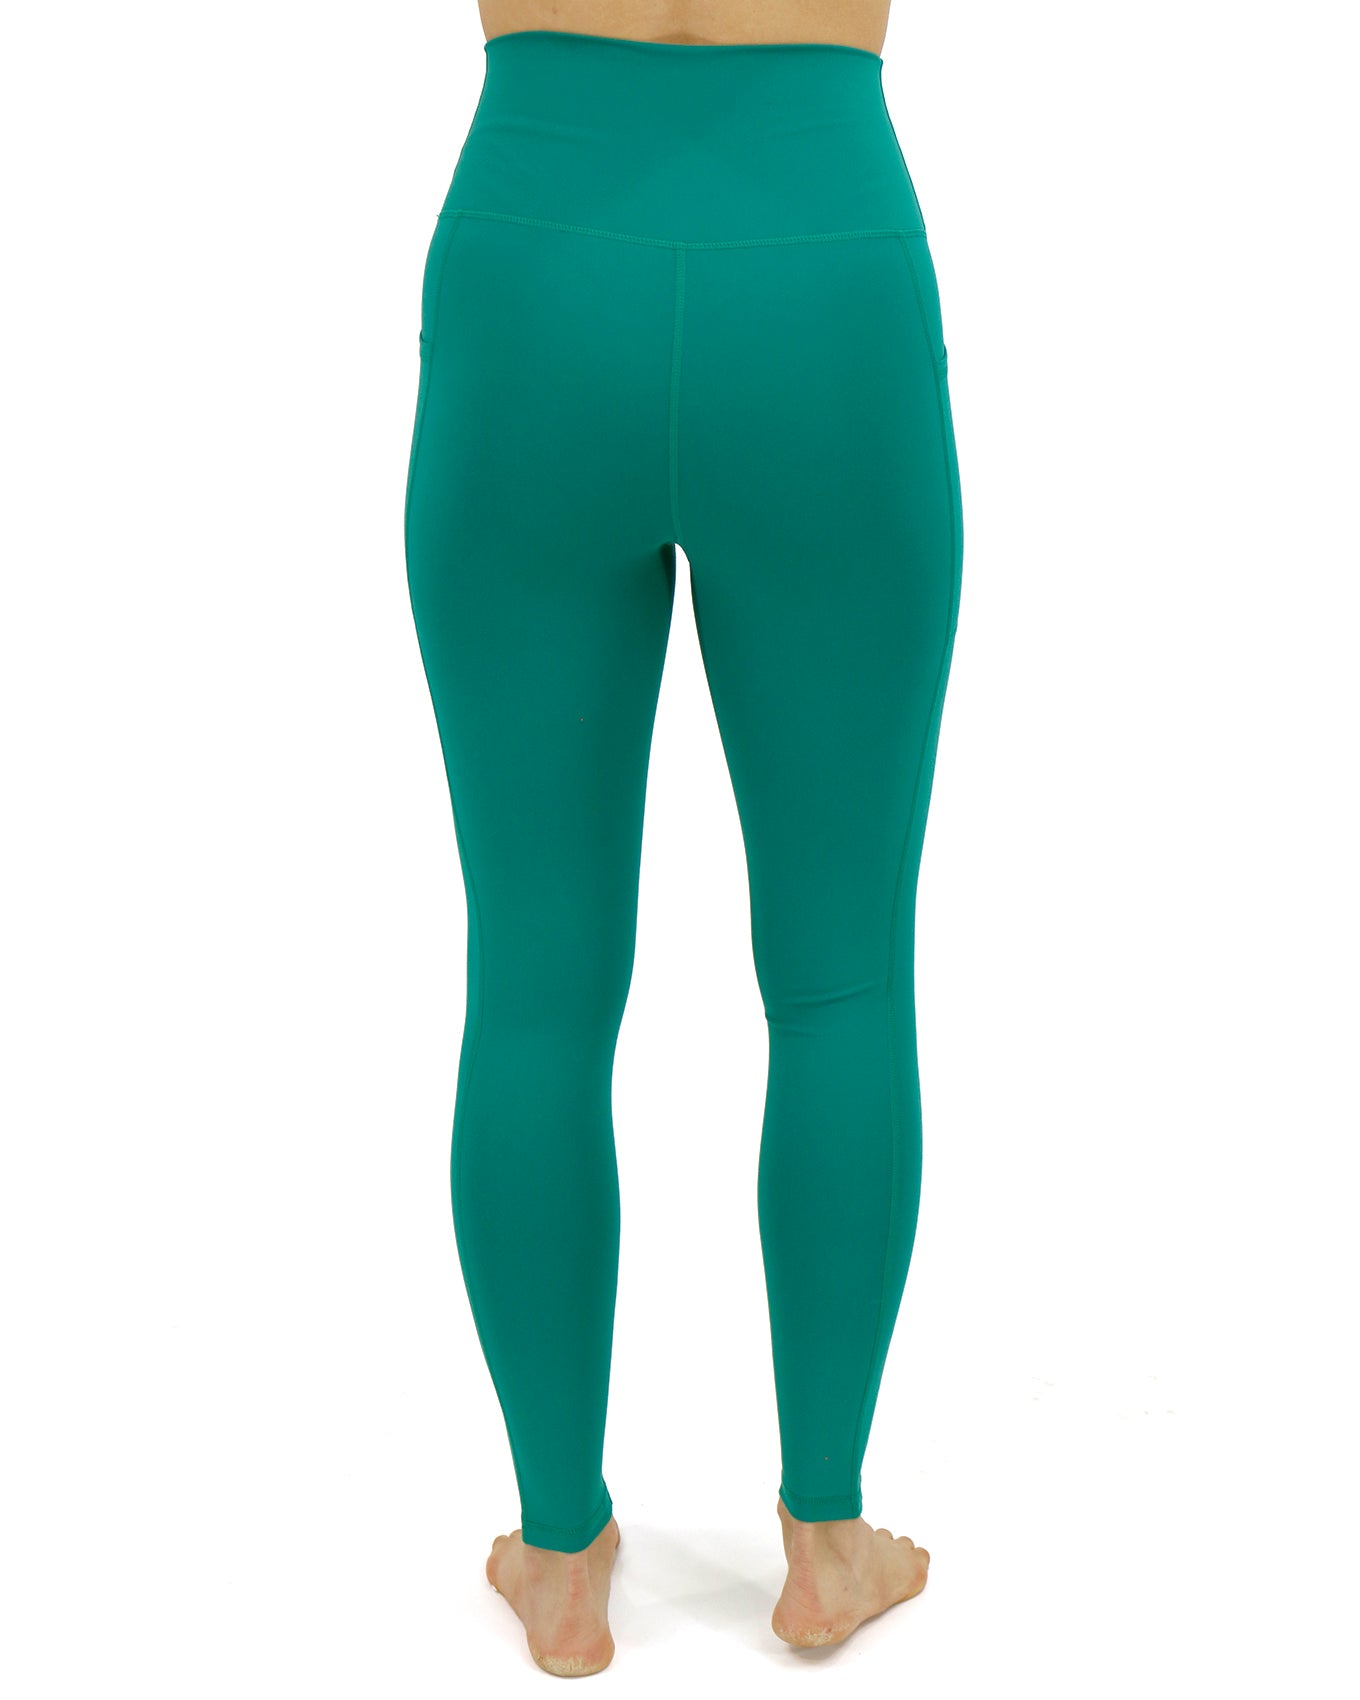 Best Squat Proof Leggings in Jungle Green - Grace and Lace